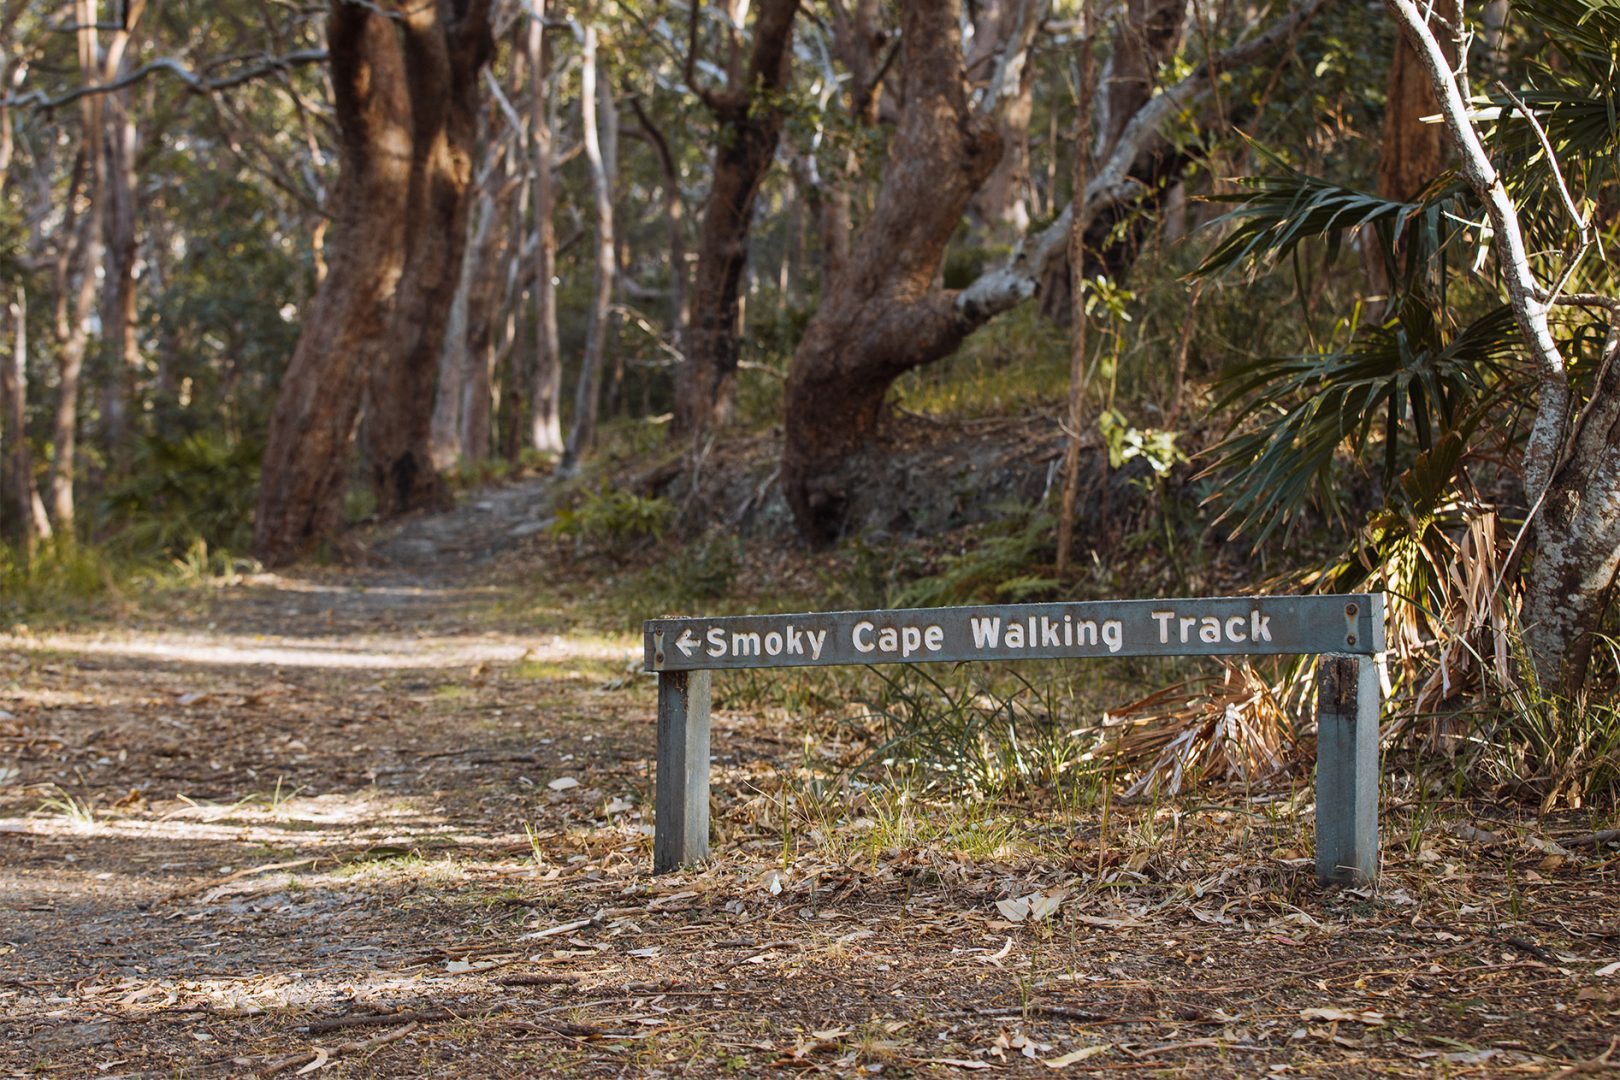 The trail from Little Bay to Smoky Cape Lighthouse in Hat Head National Park